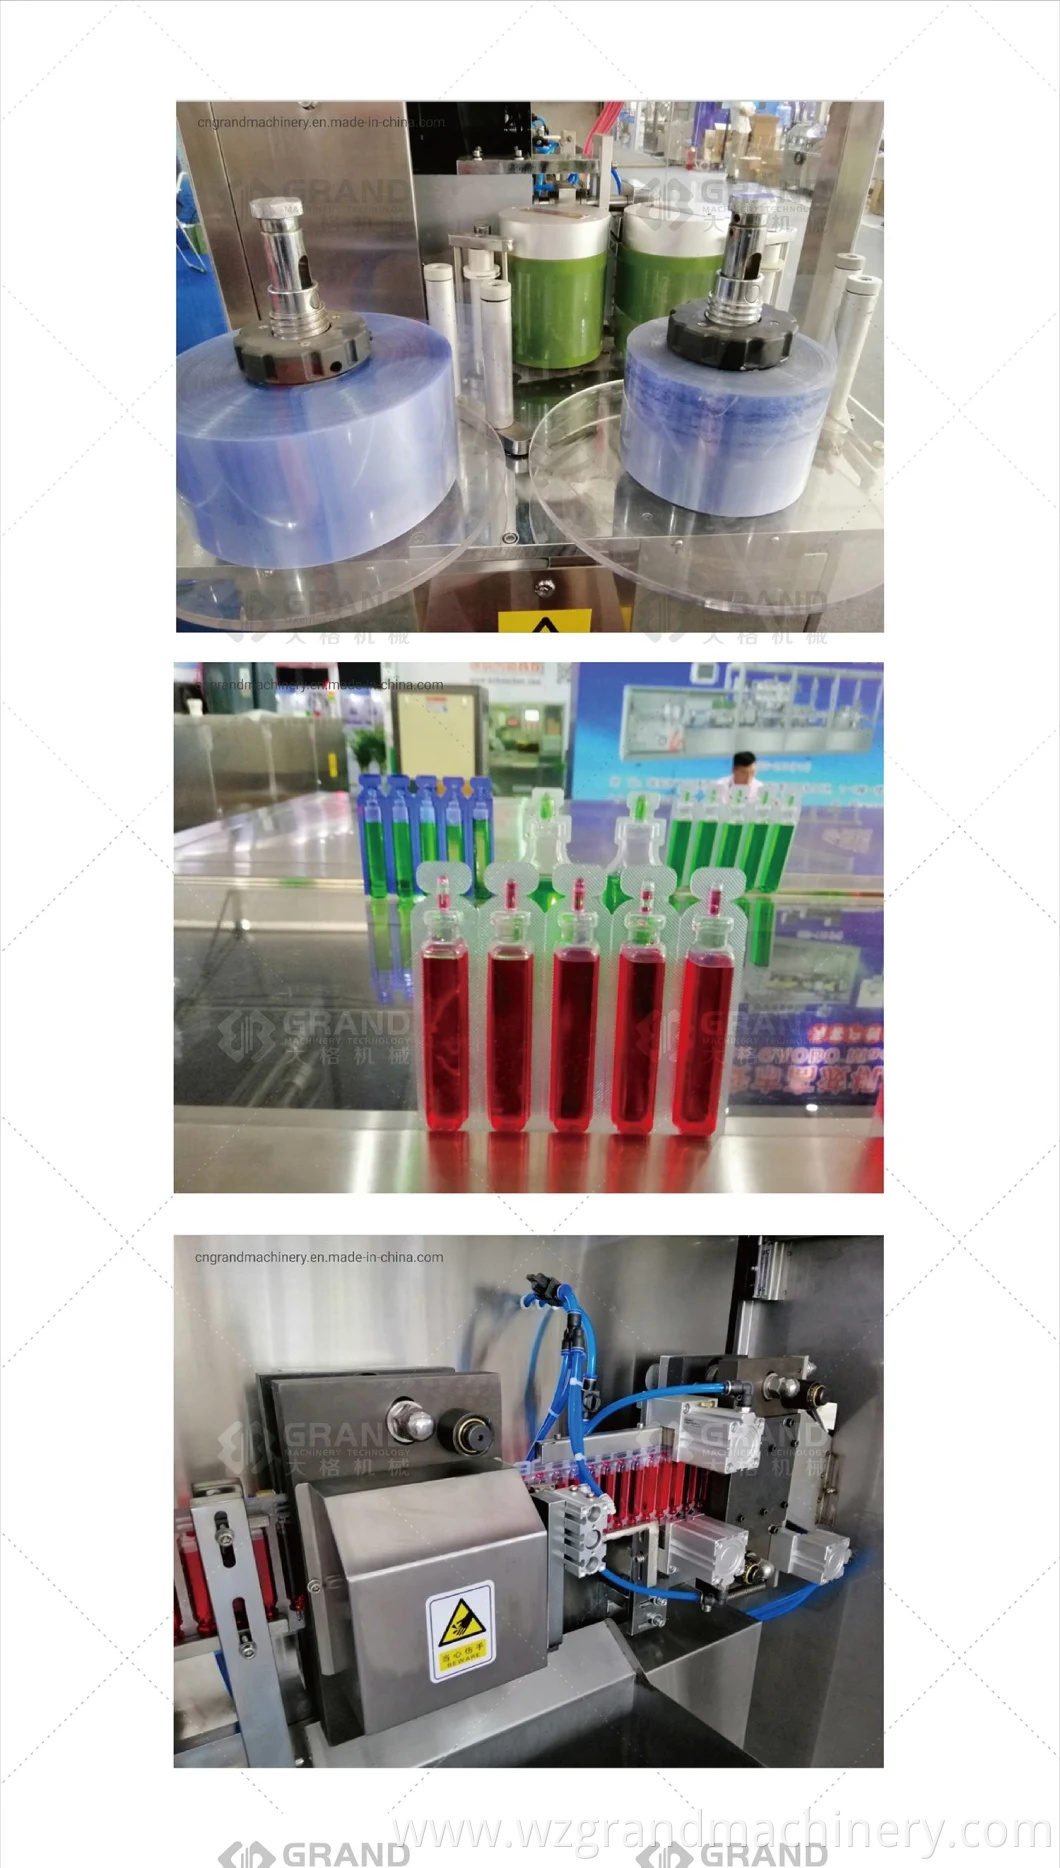 Ggs-118 P5 Automatic Plastic Ampoule Forming Filling Sealing Machinery with Pm-100 Labeling Machine